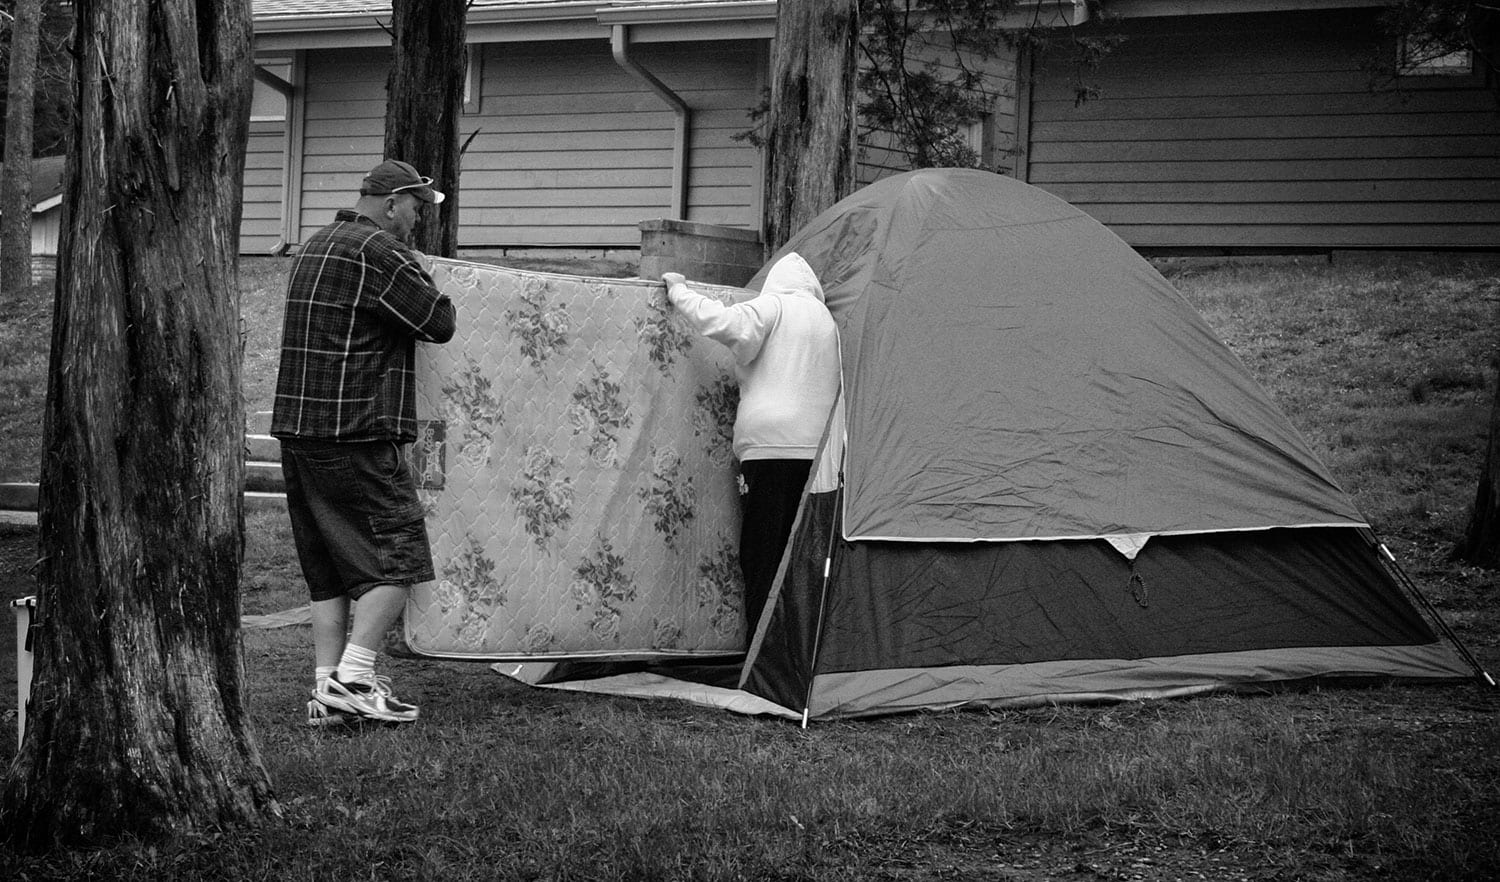 Shane Humerick and Brittany Partin set up their tent in Cove Lake Park Campground. photo by Ben Moser - 2009